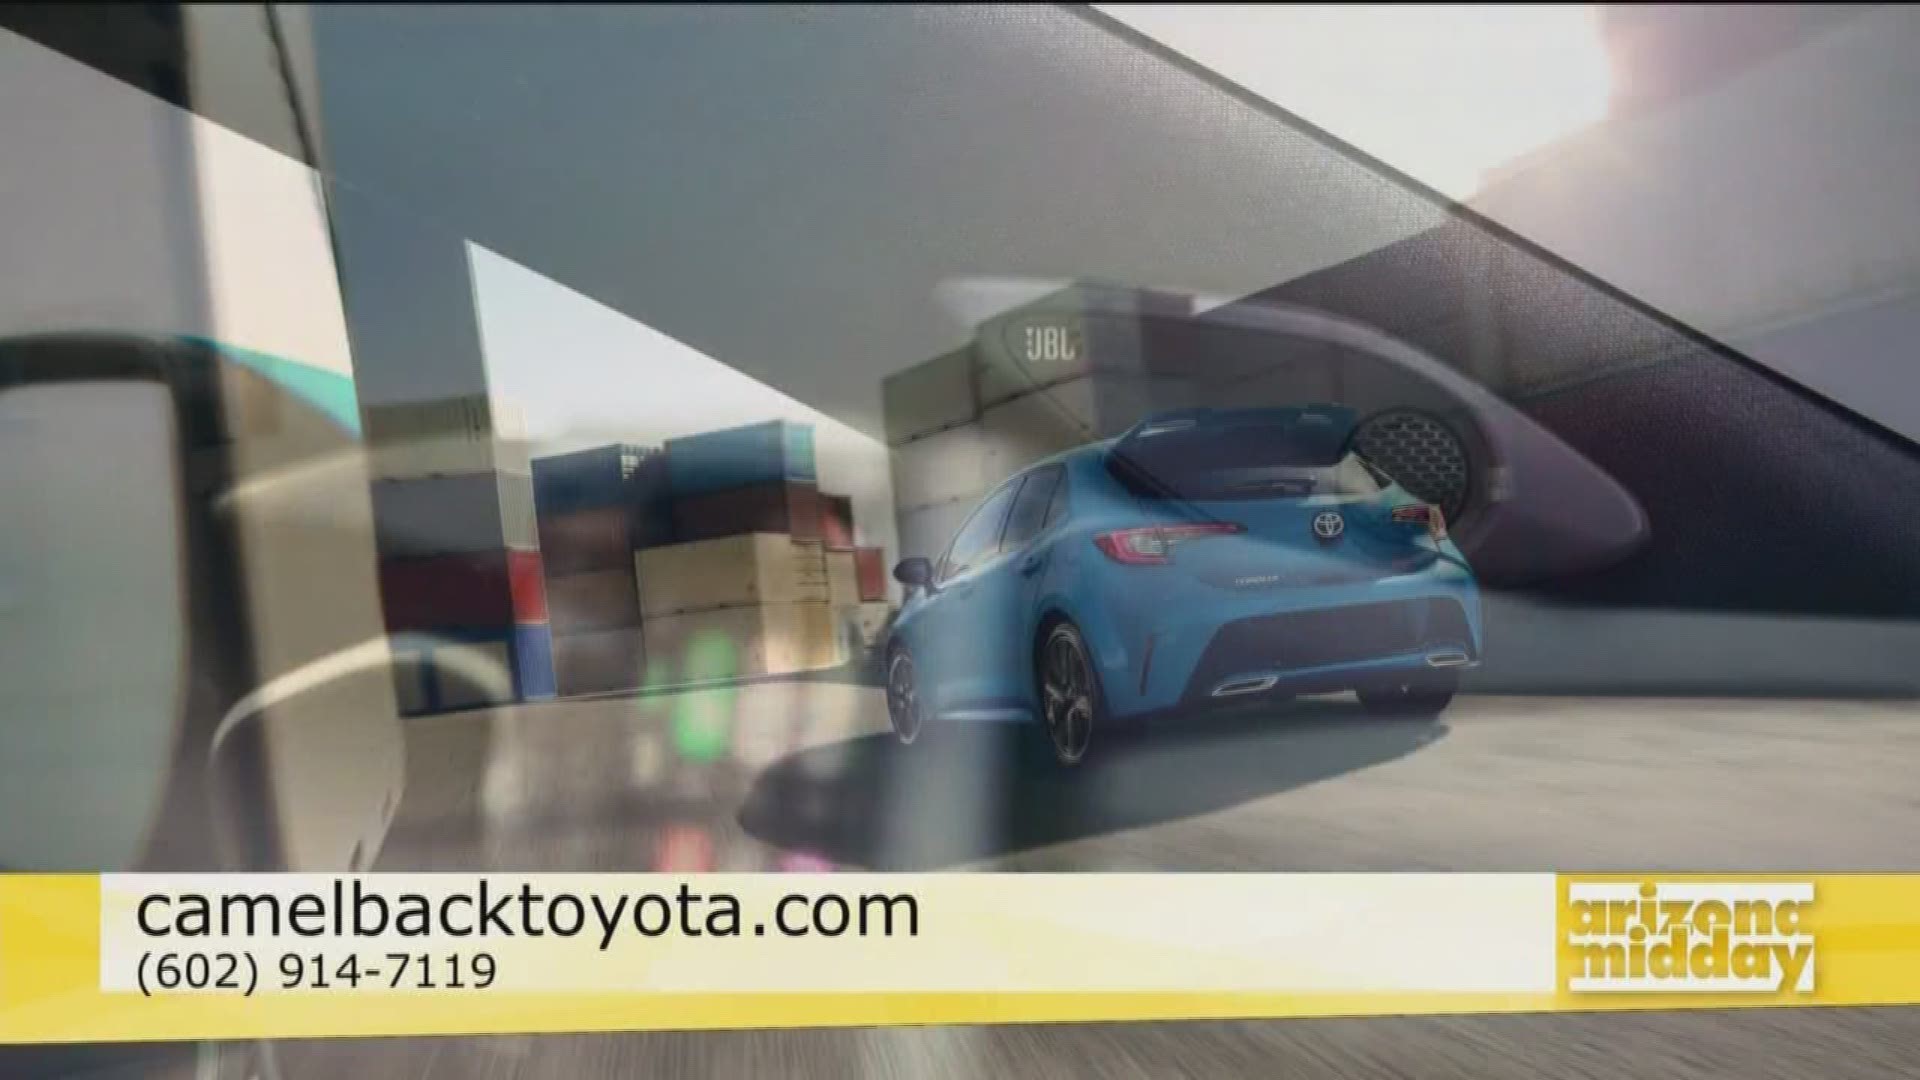 Robert Bapst with Camelback Toyota gives us the scoop on holiday car deals!